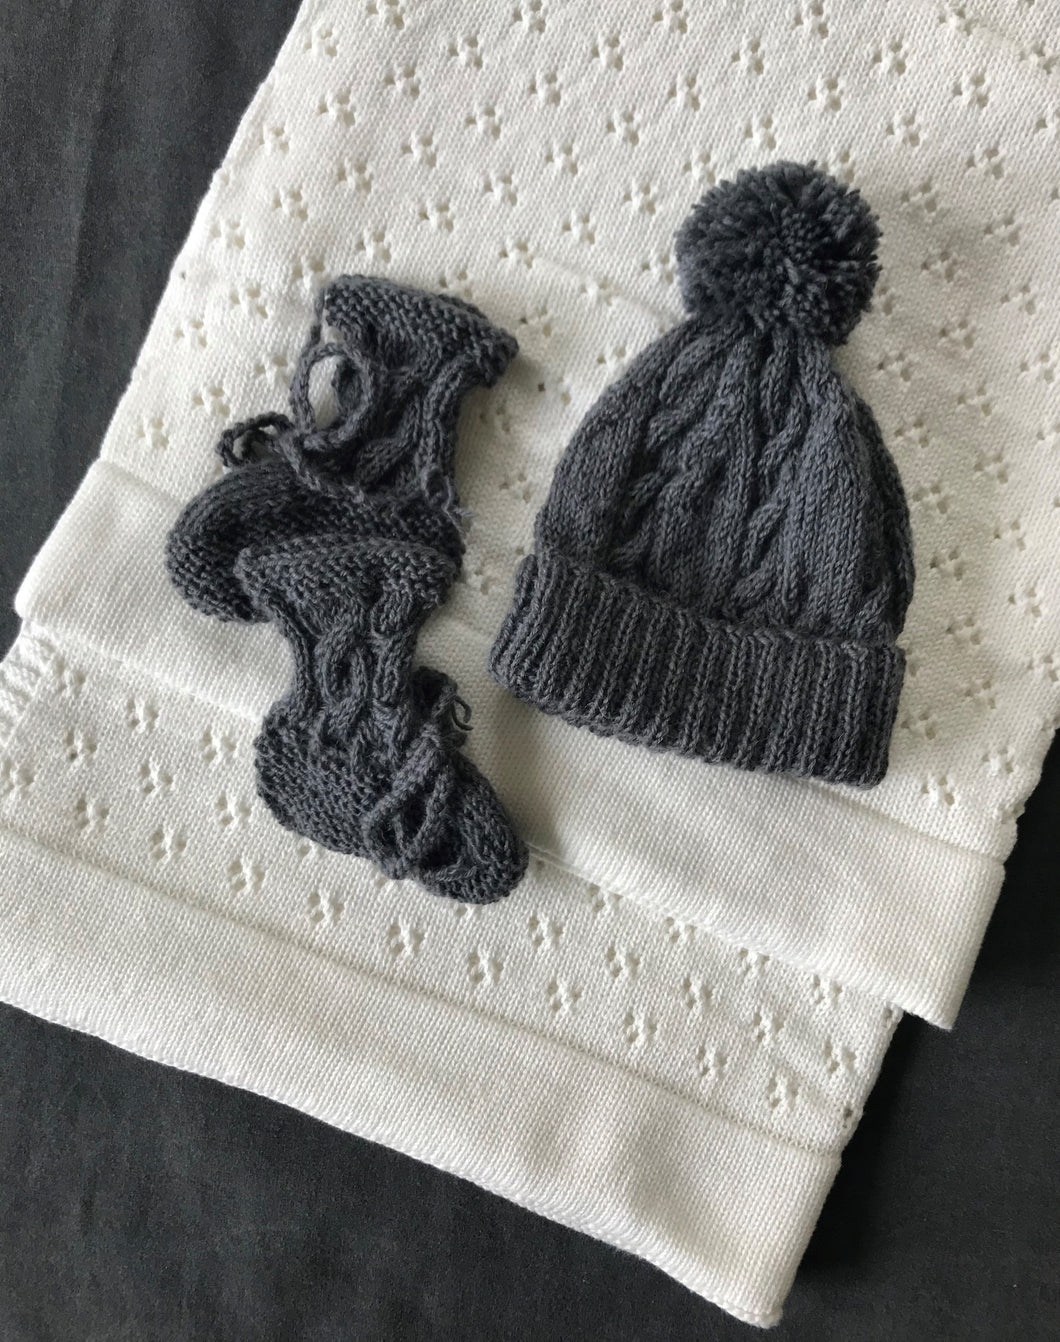 The Knit Baby Pack